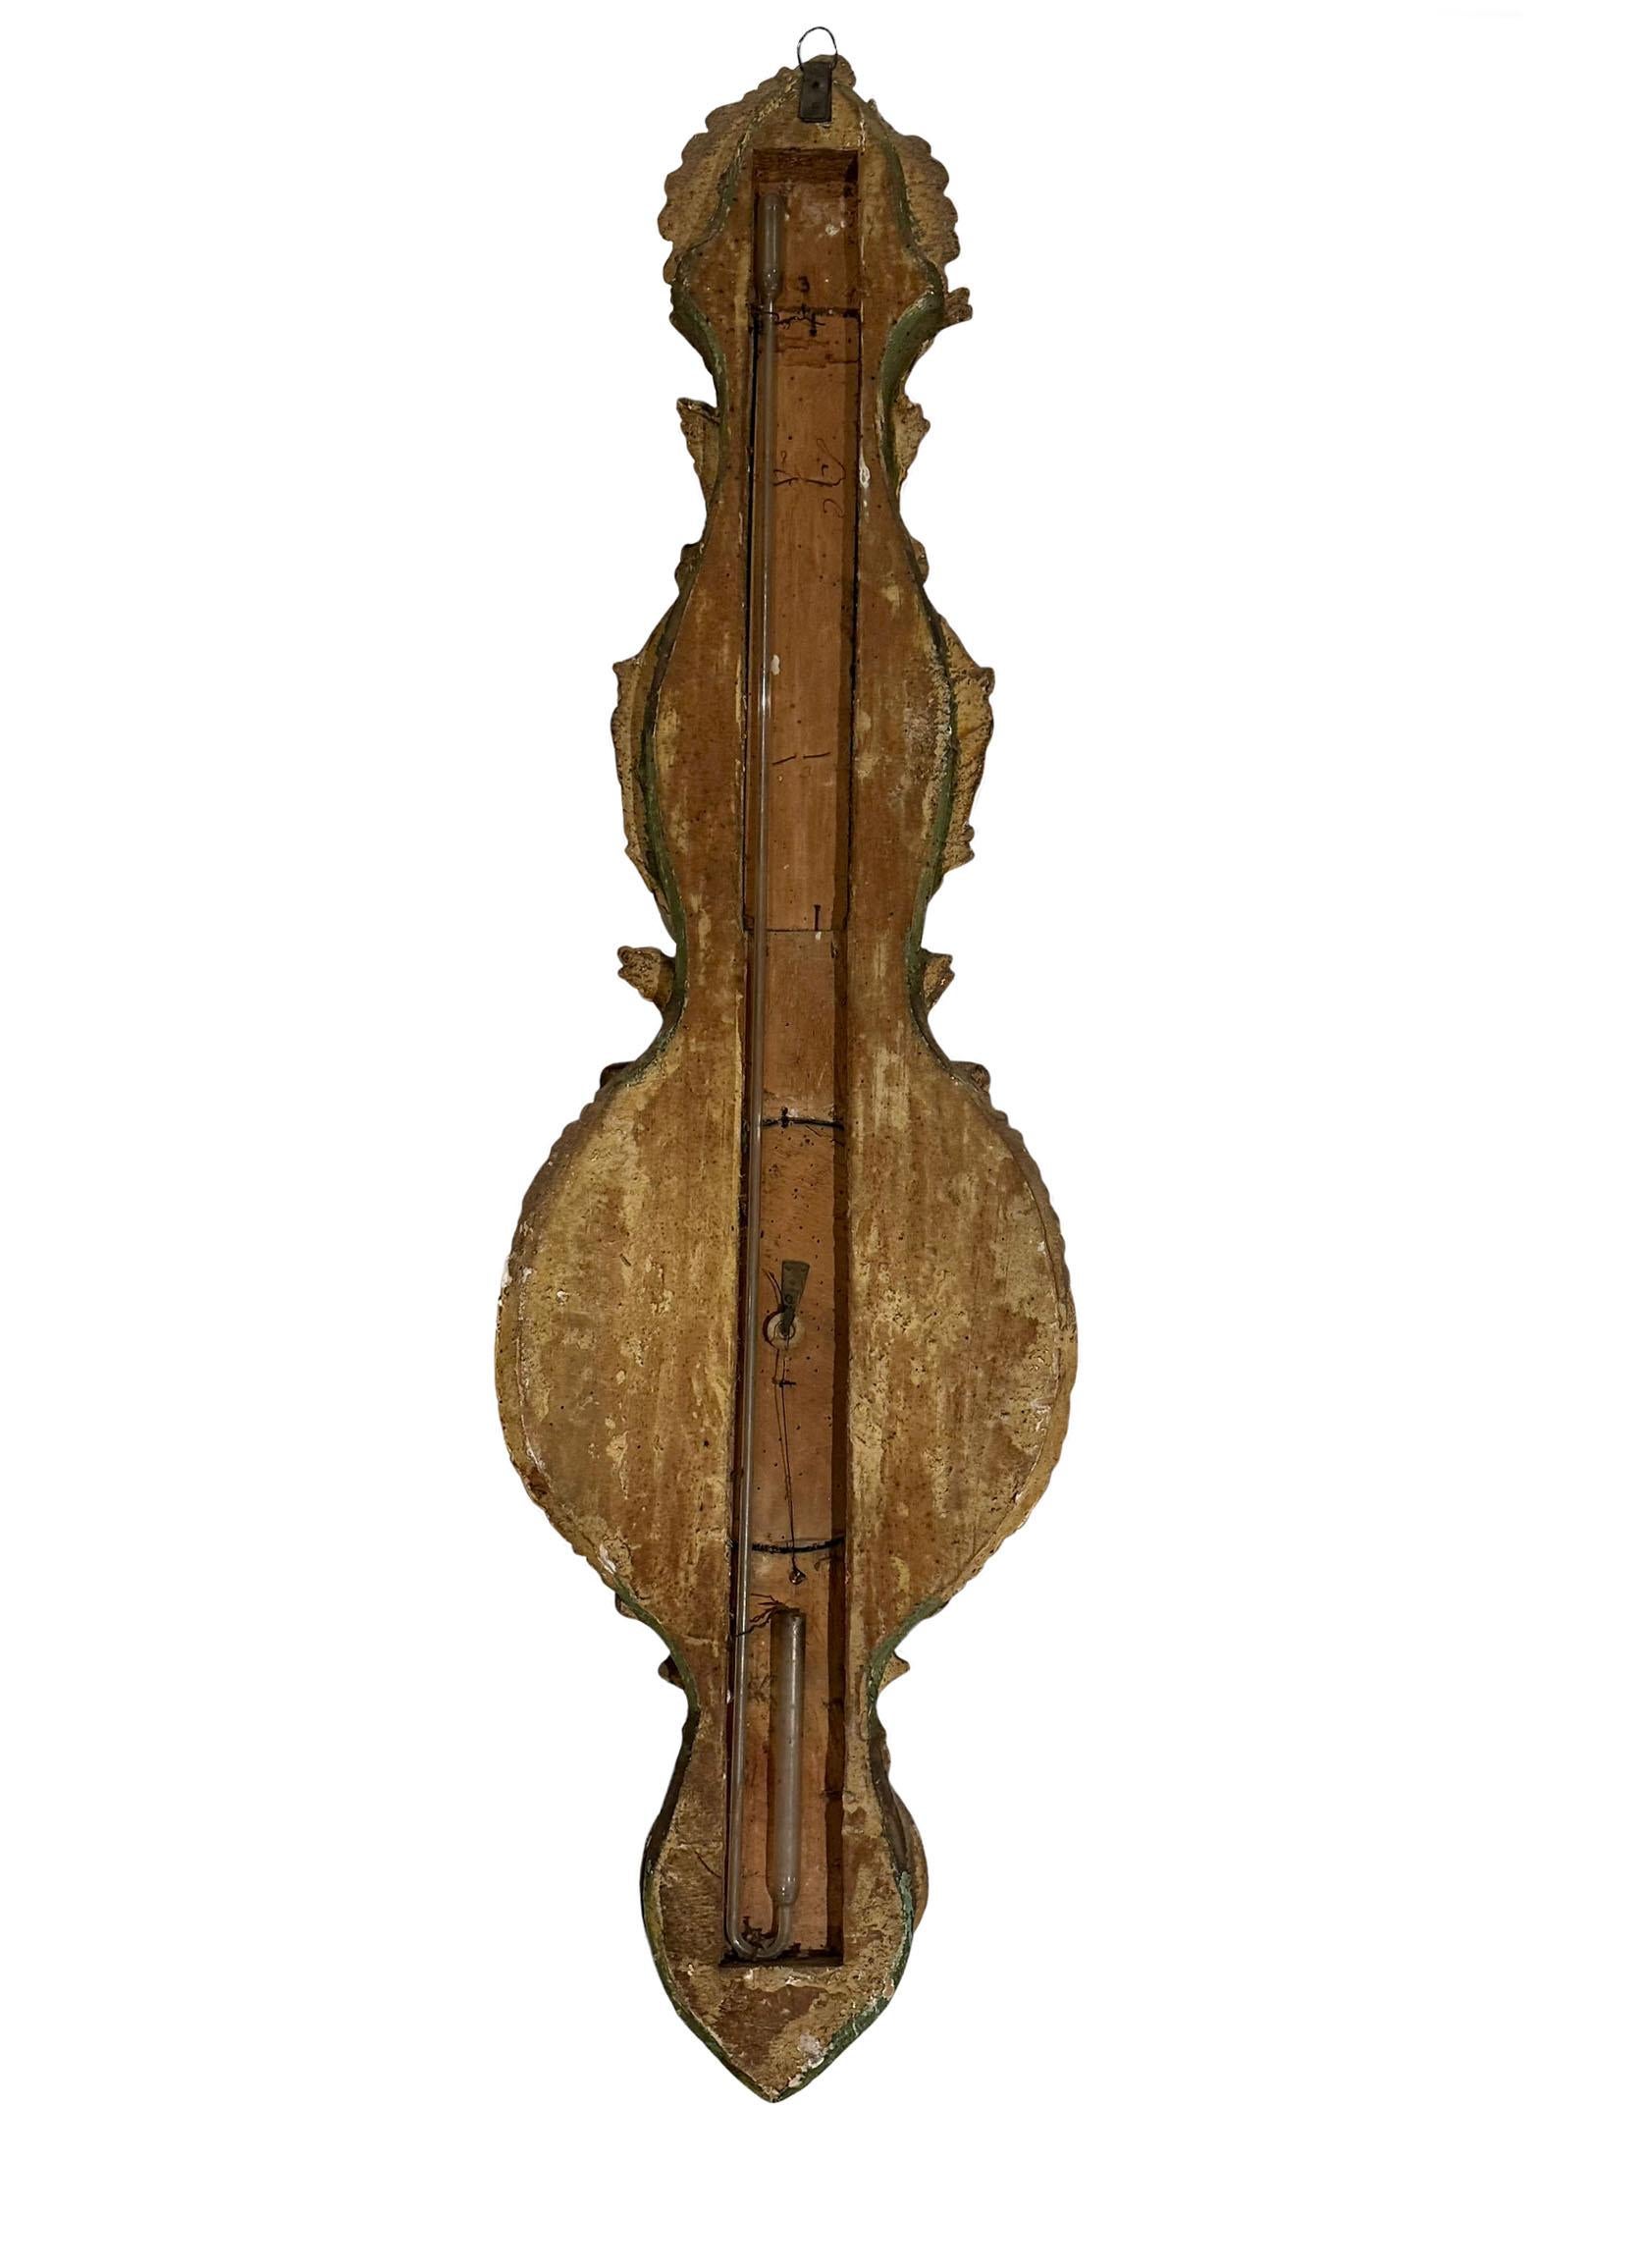 Late 18th Century French Barometer